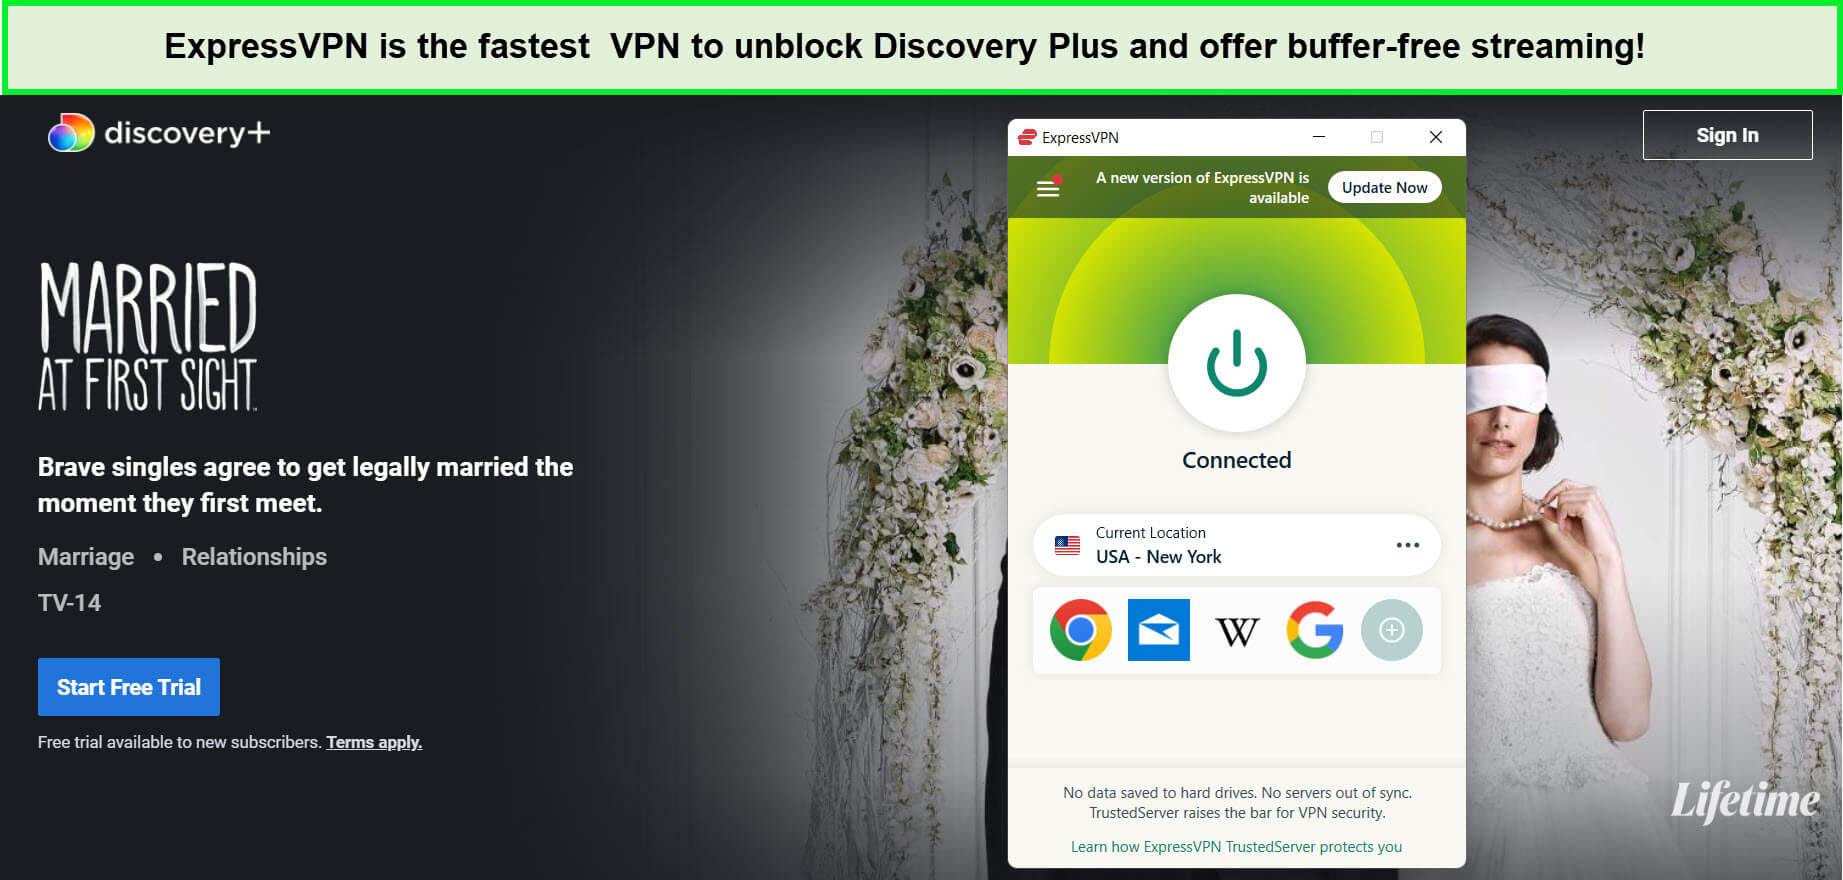 expressvpn-unblocks-married-at-first-sight-journey-so-far-nashville-on-discovery-plus-outside-usa